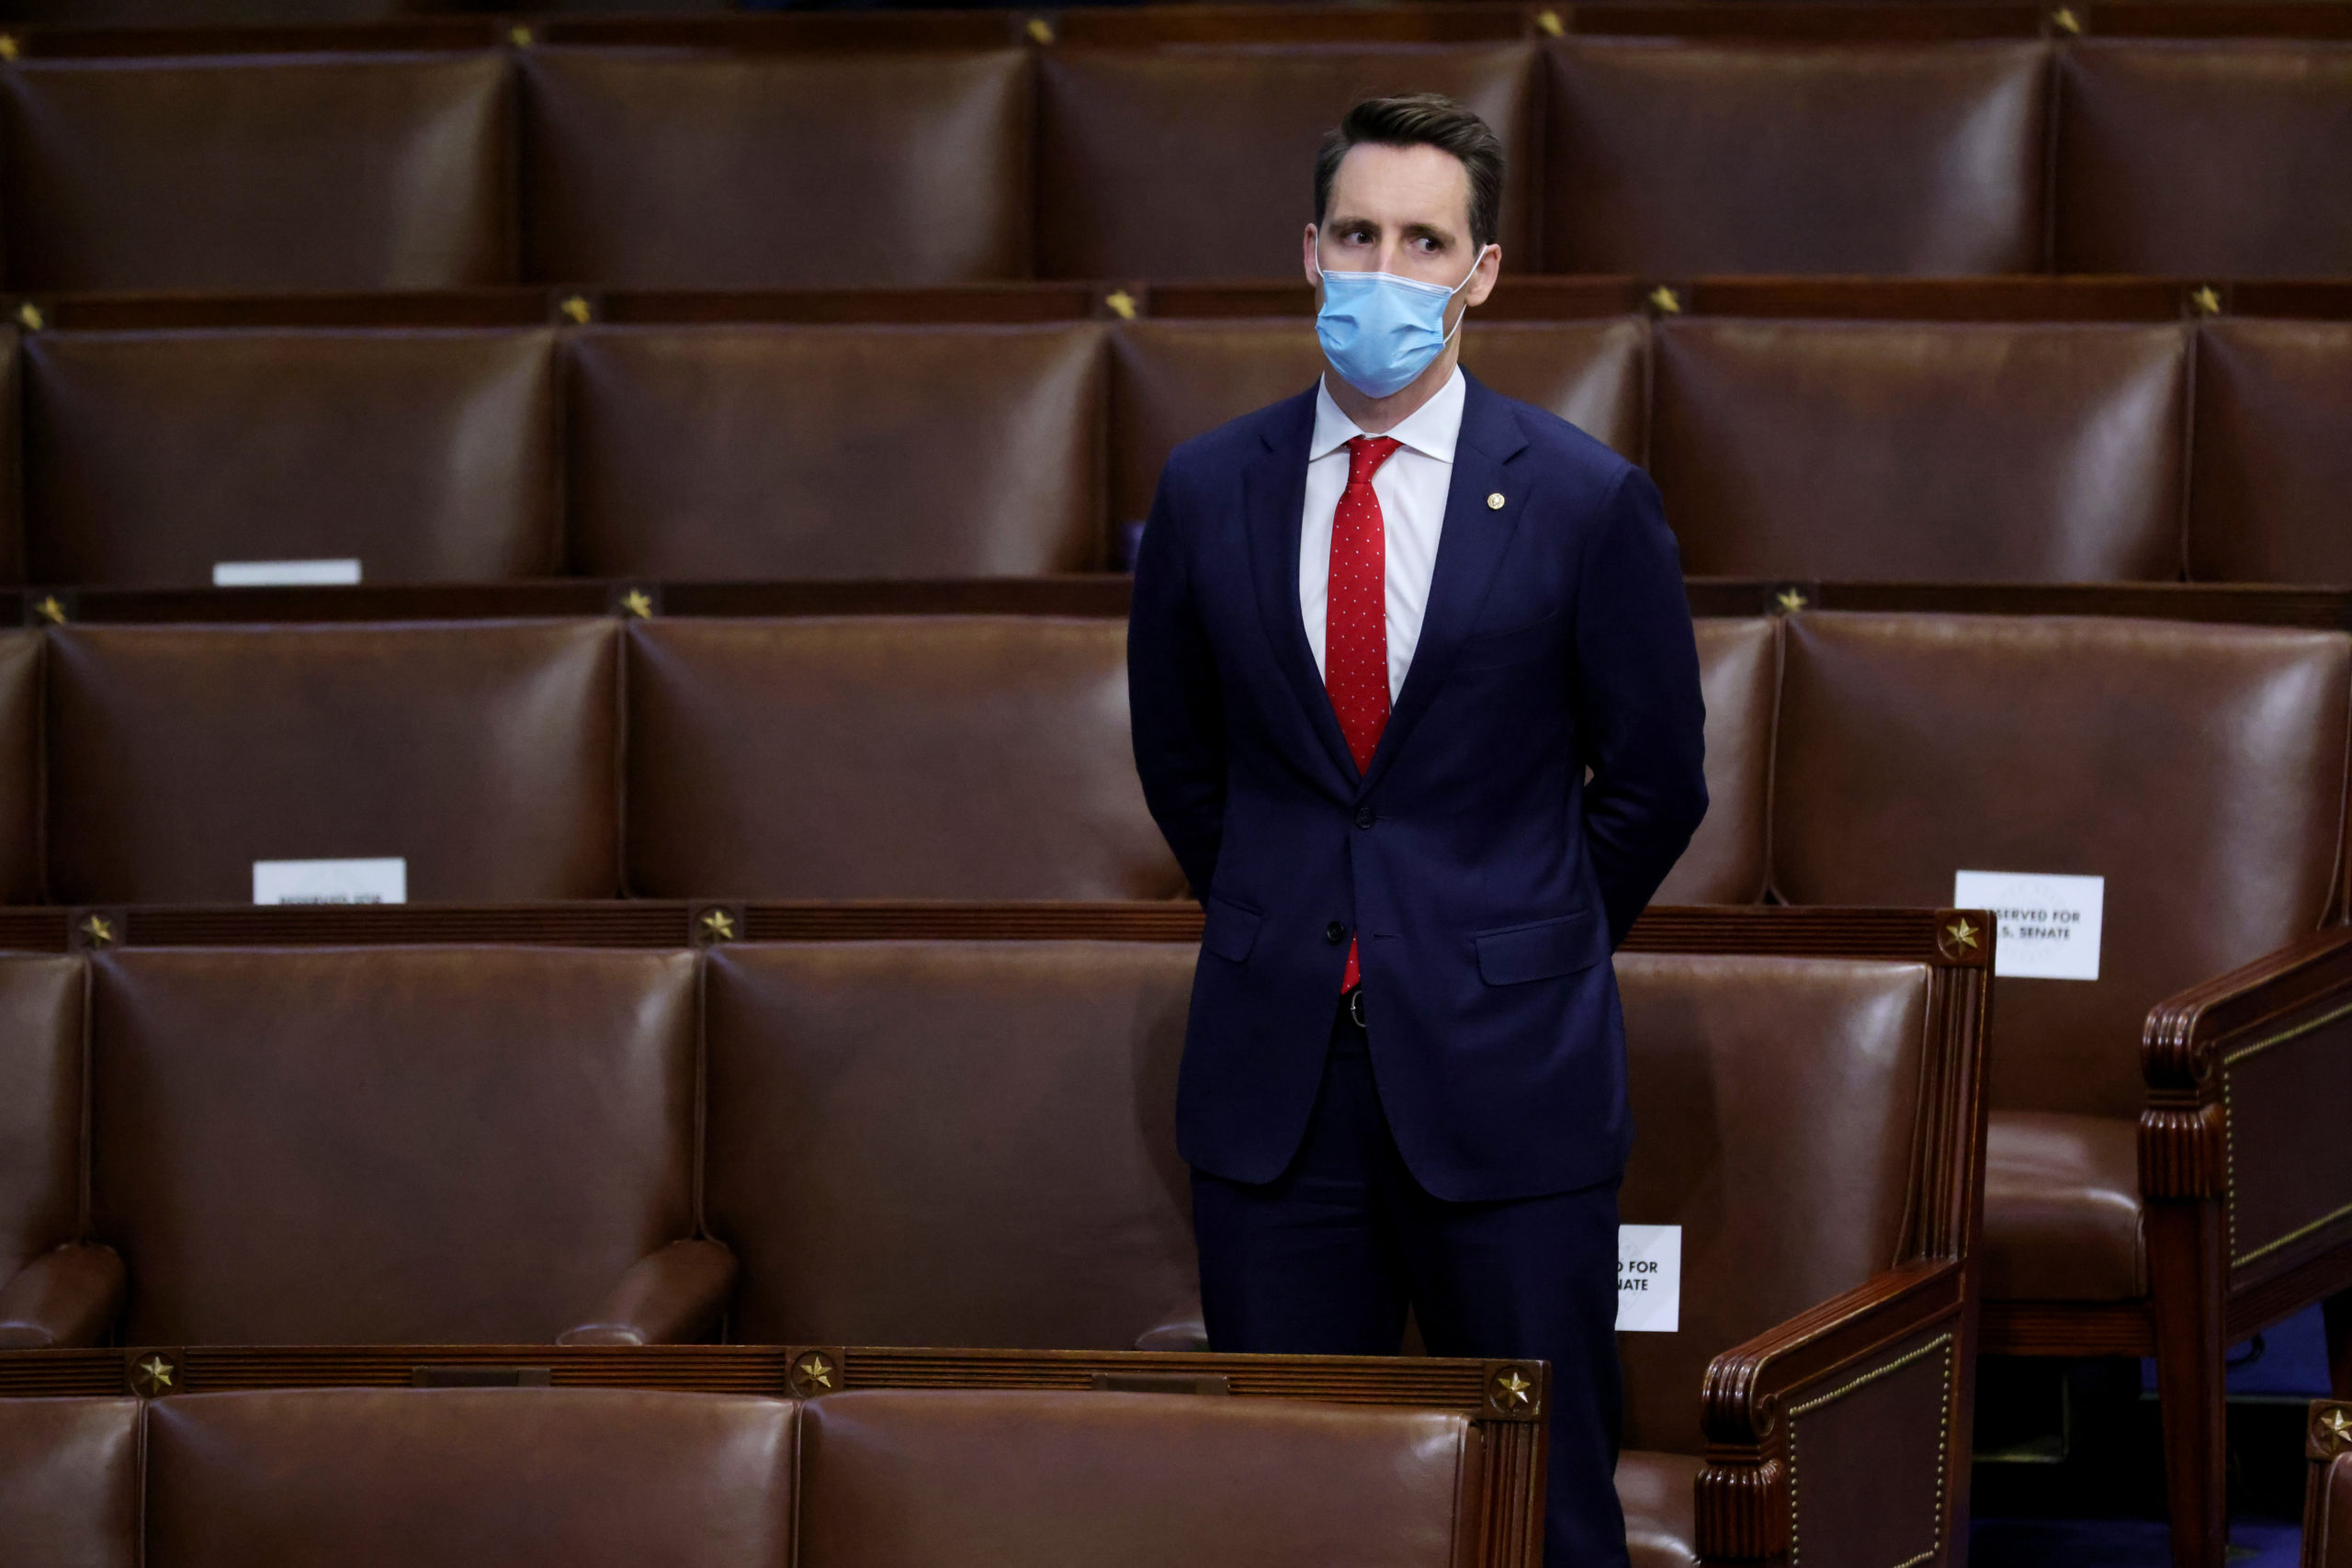 Sen. Josh Hawley stands in the House Chamber during a reconvening of a joint session of Congress on Jan. 6. (Win McNamee/Getty Images)